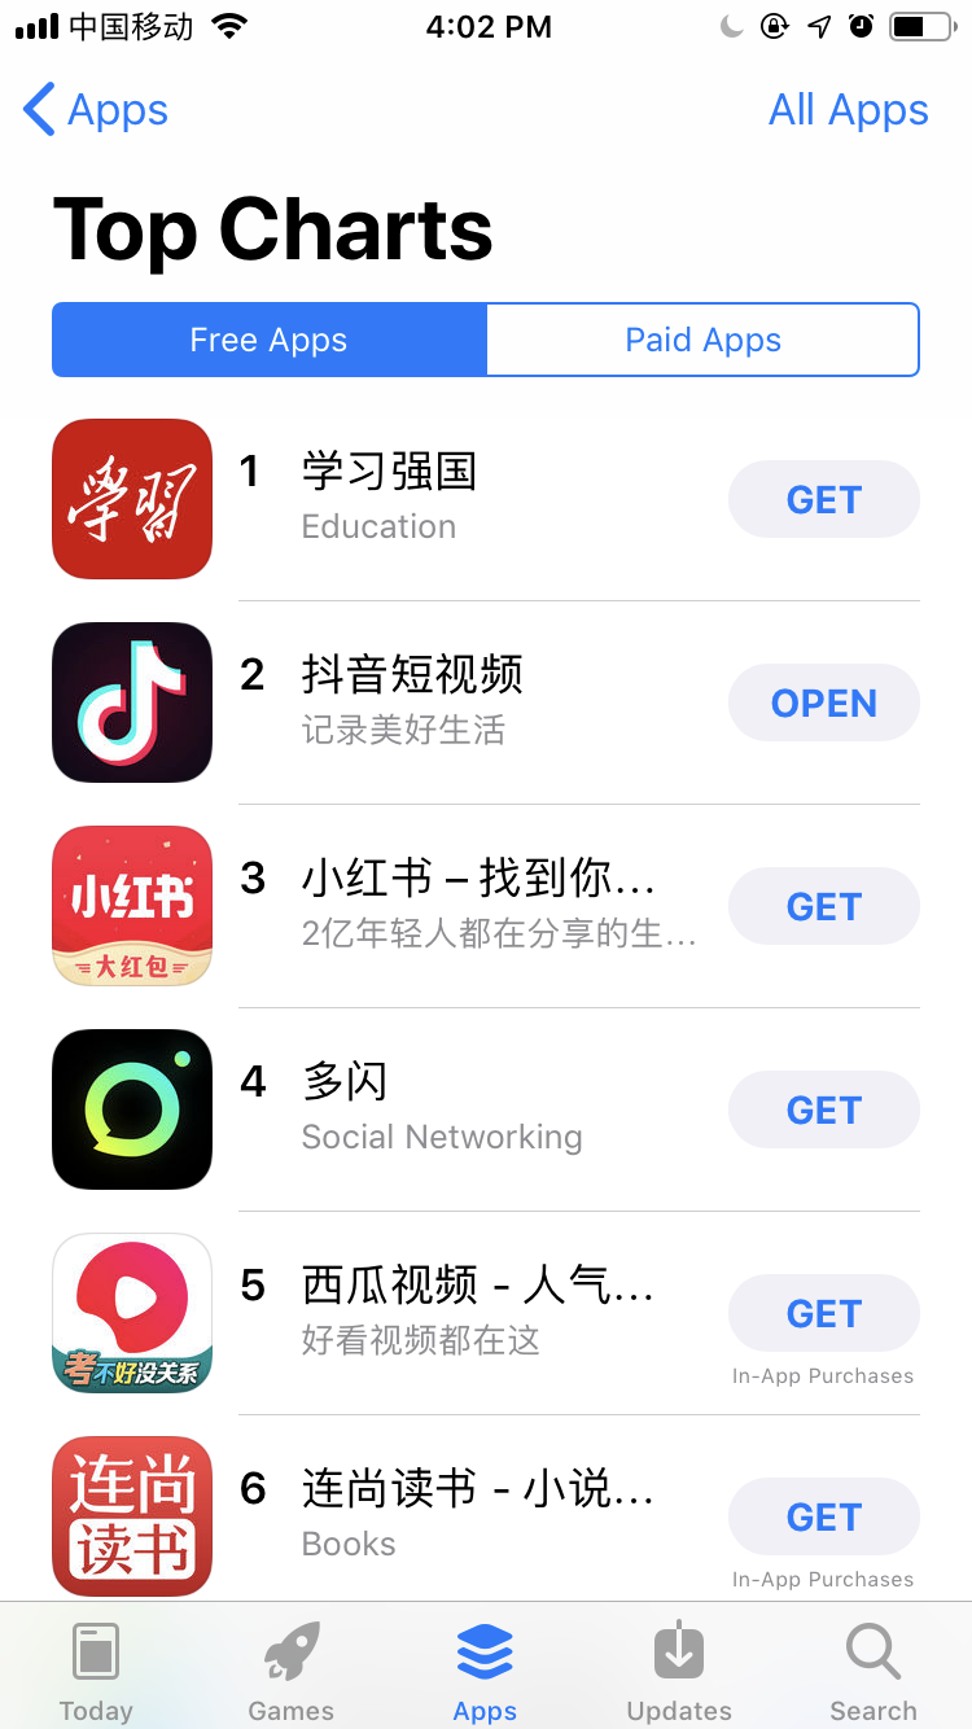 A screenshot of Xuexi Qiangguo atop the rankings of the most downloaded free apps in Apple’s App Store in China.